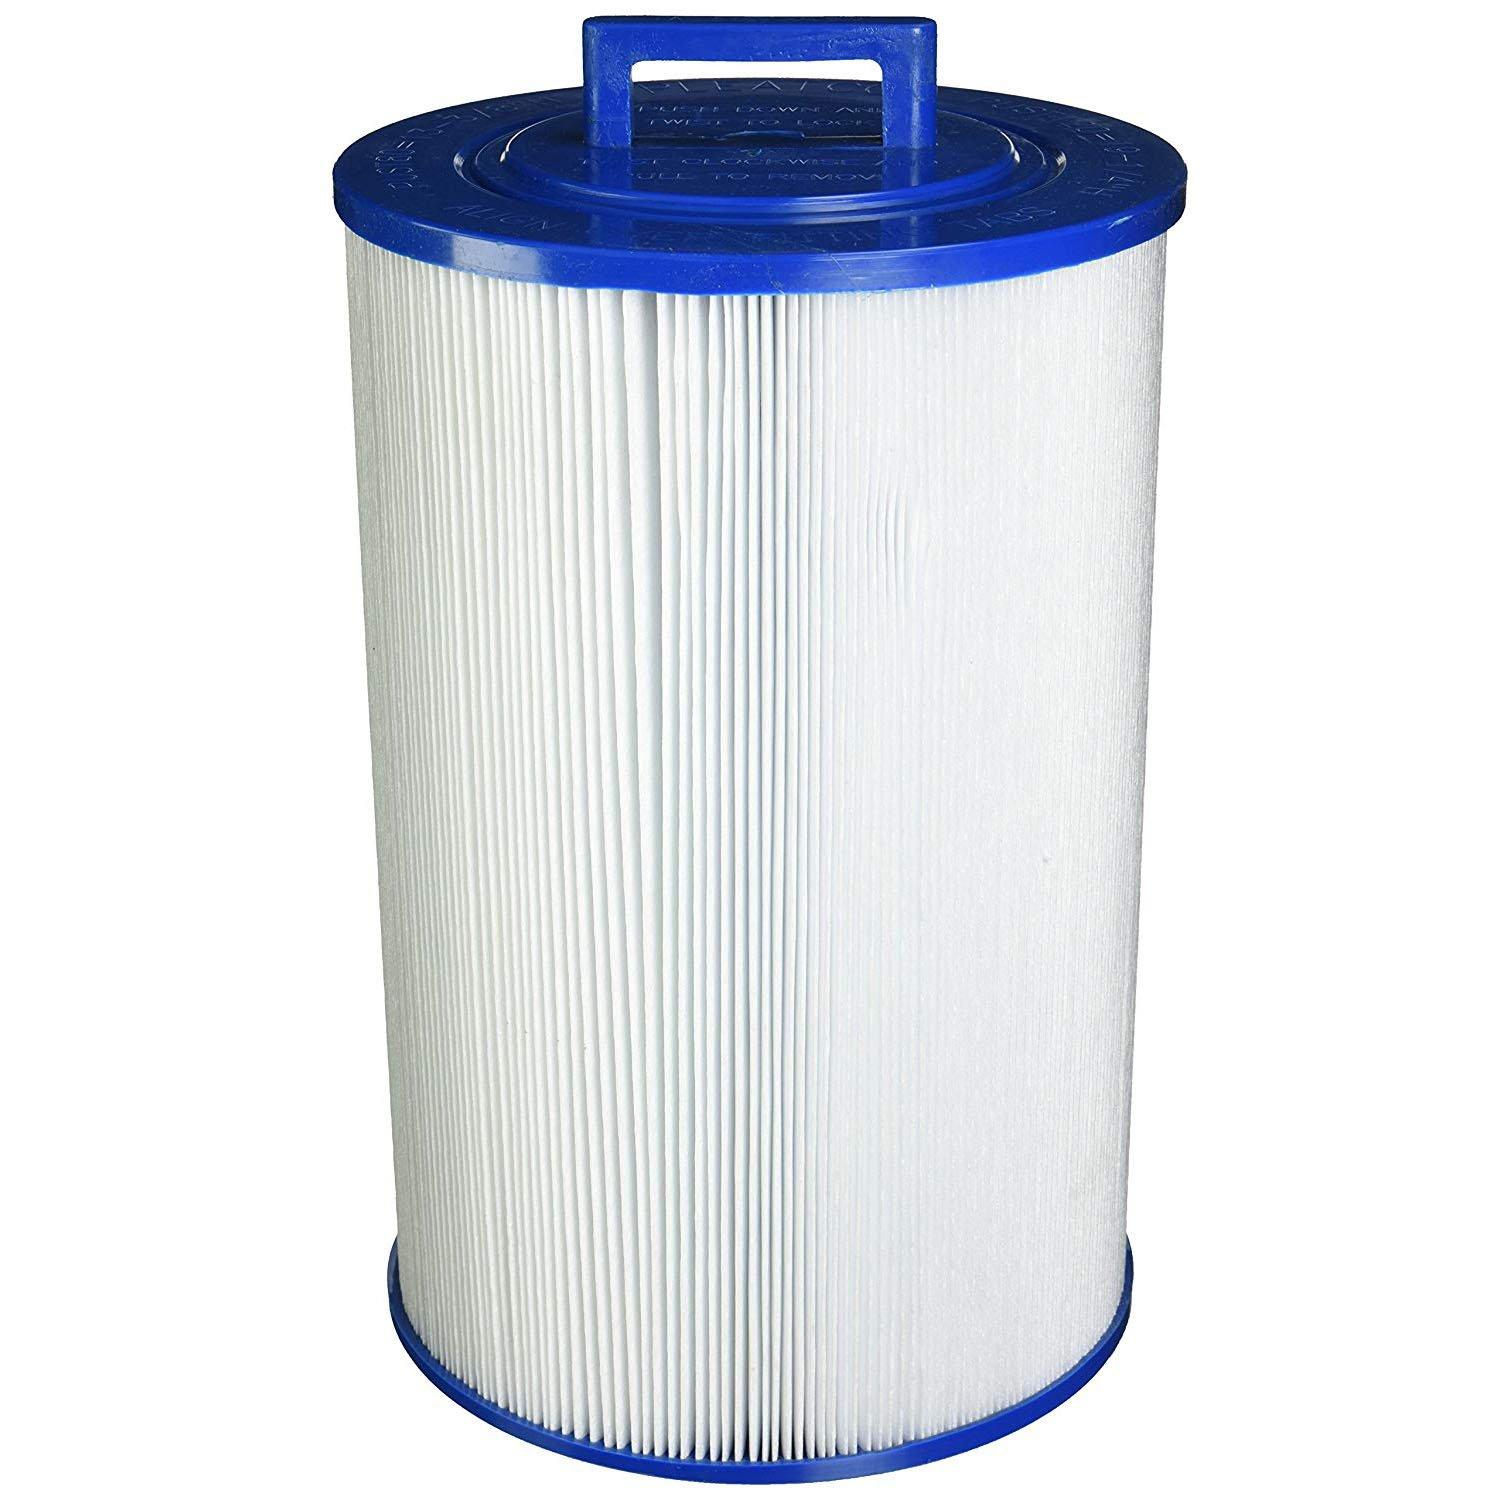 Filter Cartridge For 80sf Top Load